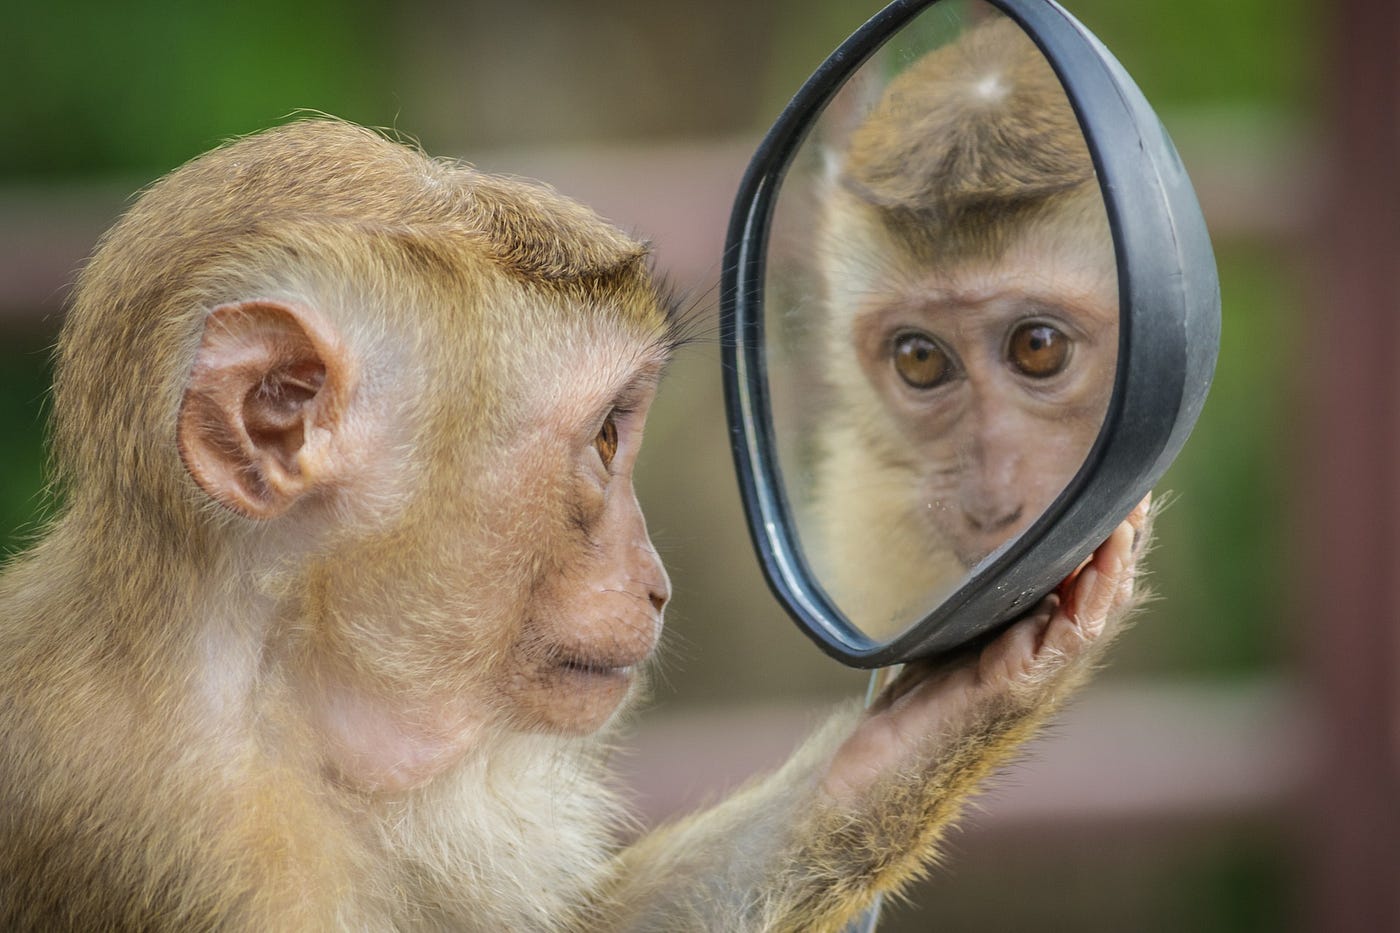 A monkey holds a mirror and looks at its own reflection